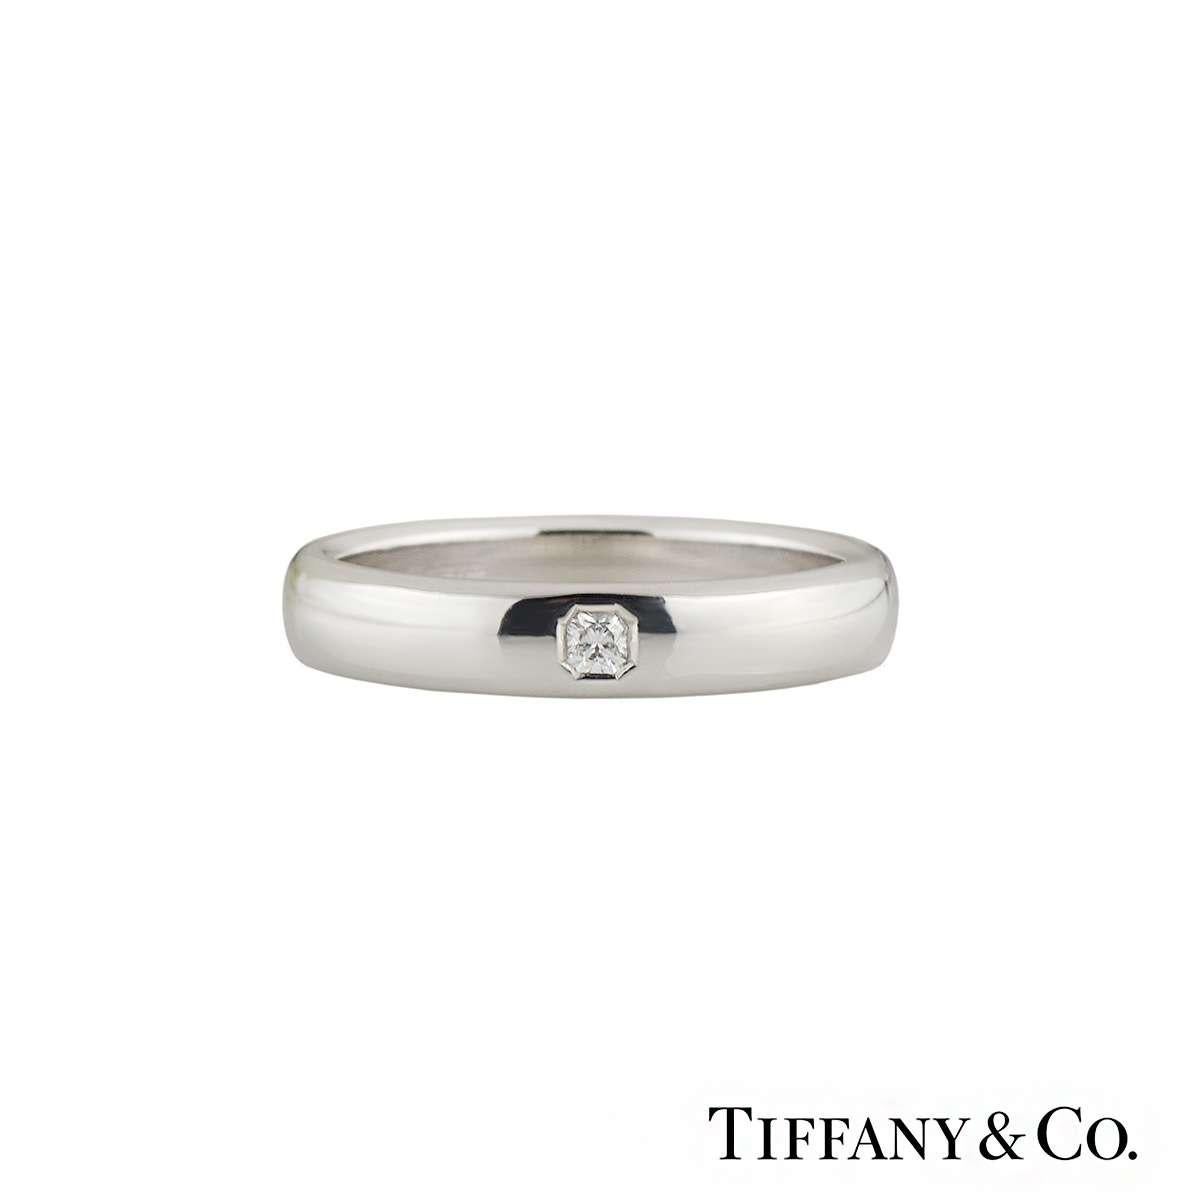 An elegant Tiffany & Co wedding band in platinum from the Lucida collection. The ring has a lucida cut diamond in a tension setting with a total weight of 0.05ct, G colour and VS2 clarity. The ring features a highly polished 4mm court fit band. The